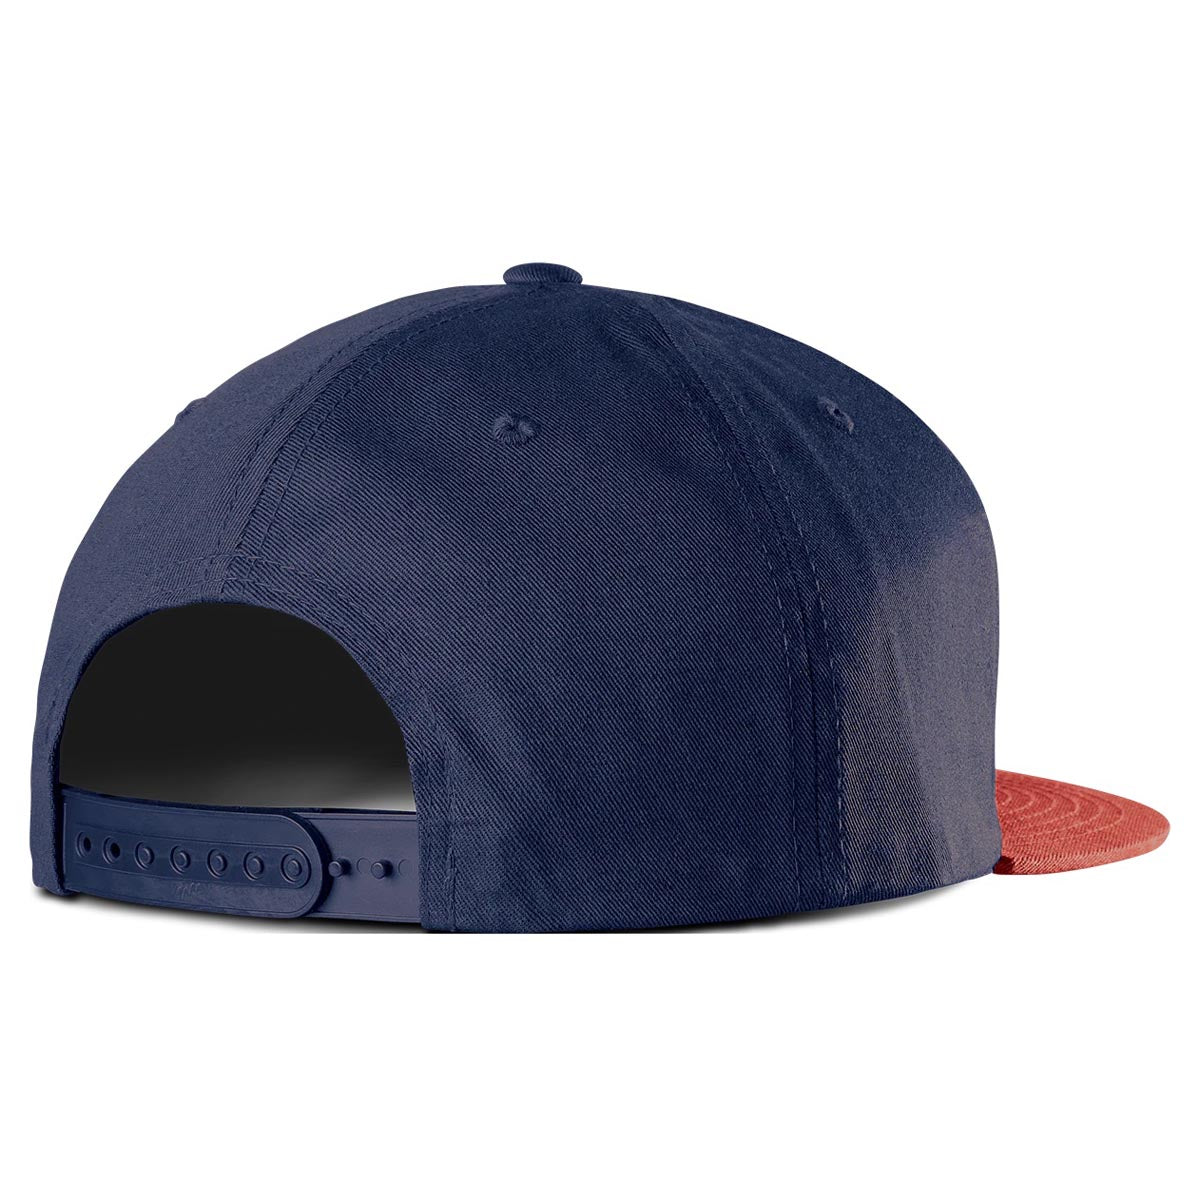 Etnies Corp Snapback Hat - Navy/Red/White image 2